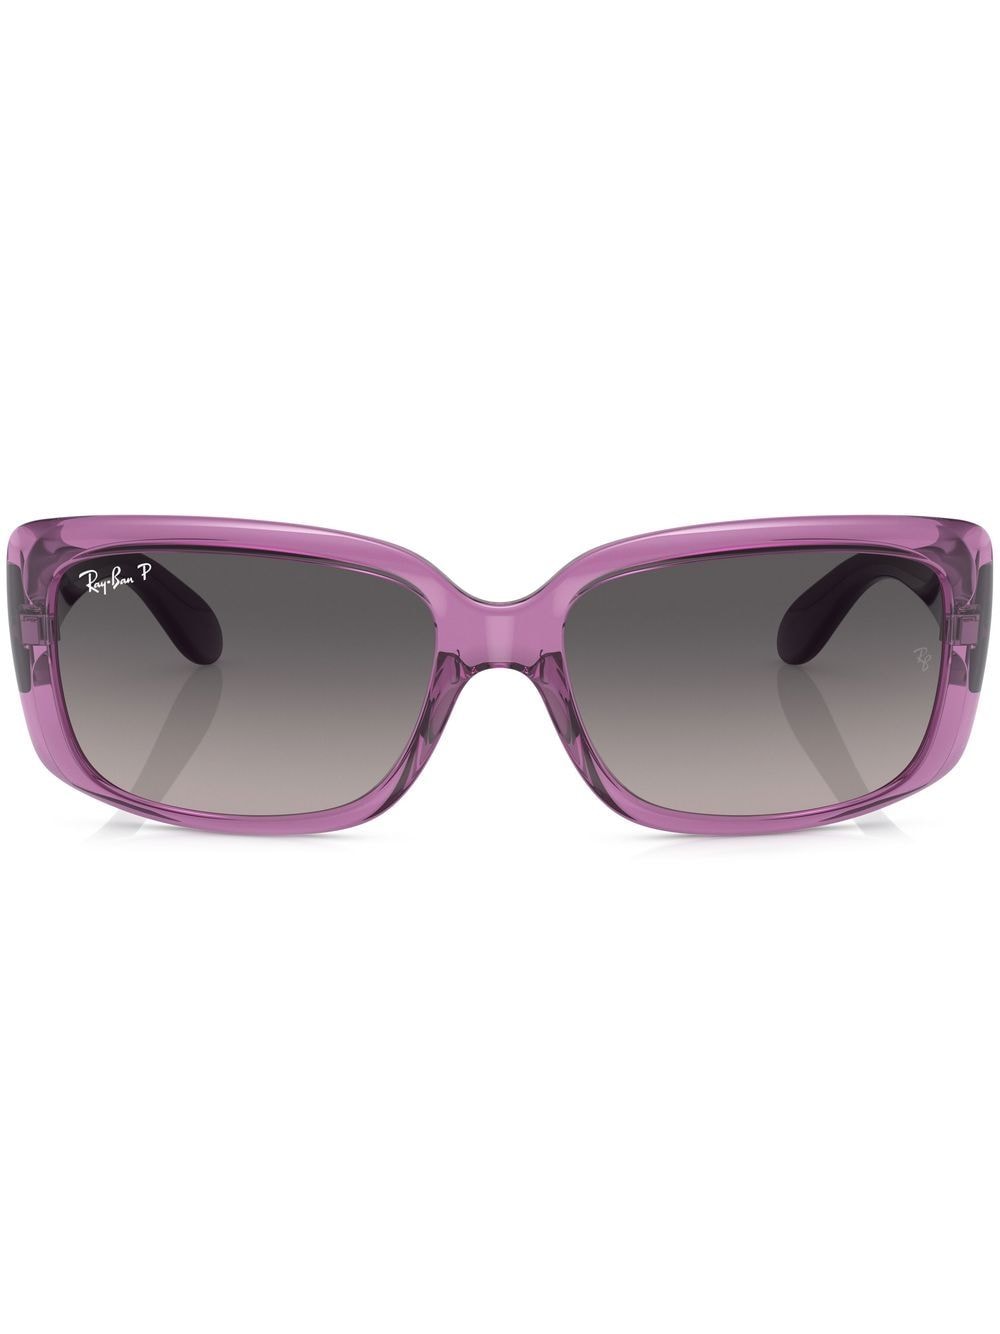 Ray-Ban square-frame sunglasses - Pink von Ray-Ban